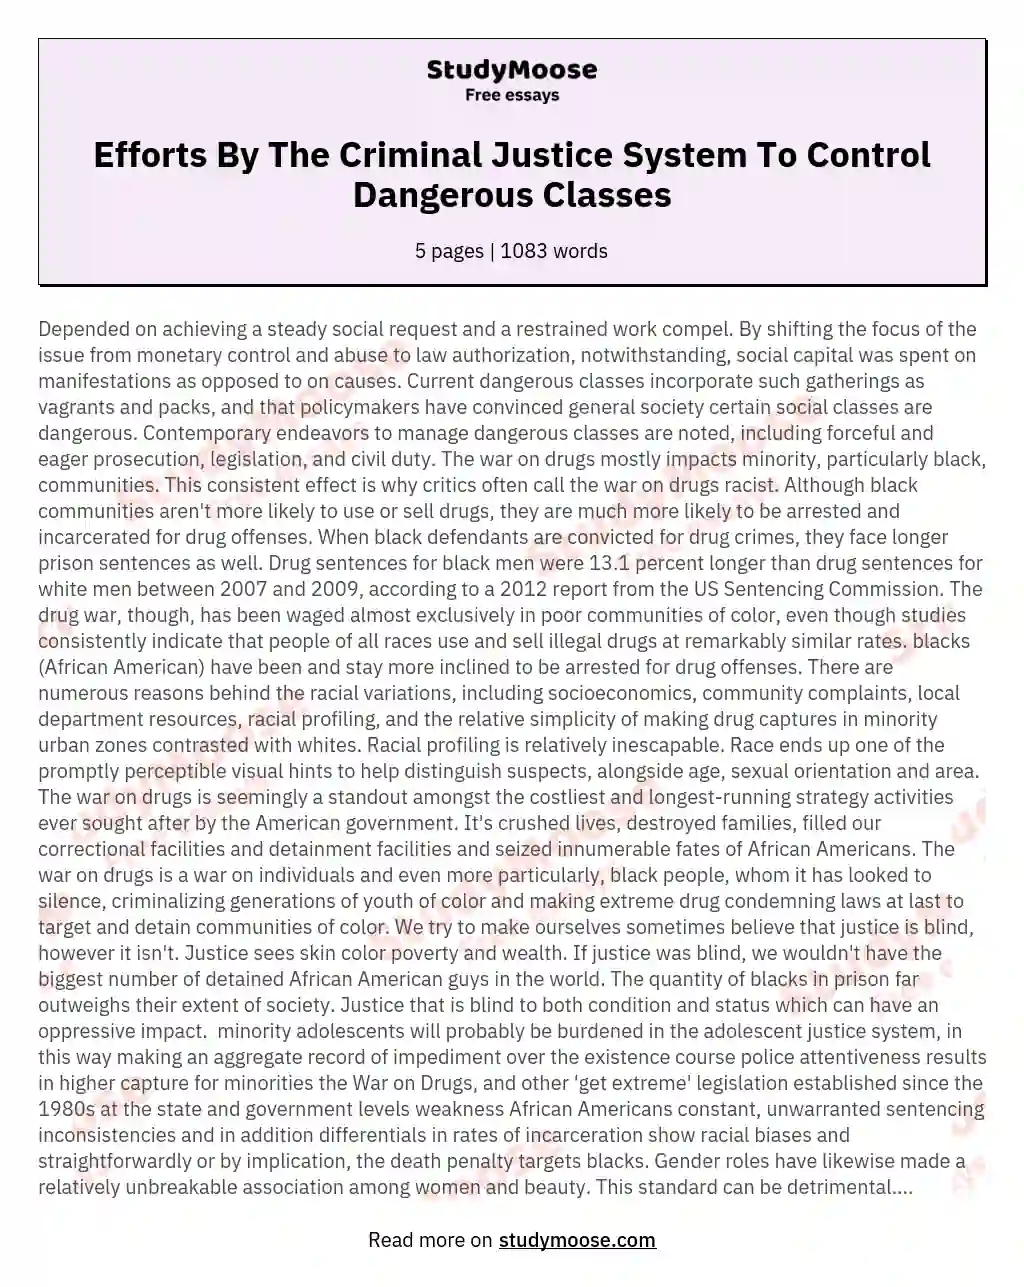 Efforts By The Criminal Justice System To Control Dangerous Classes essay